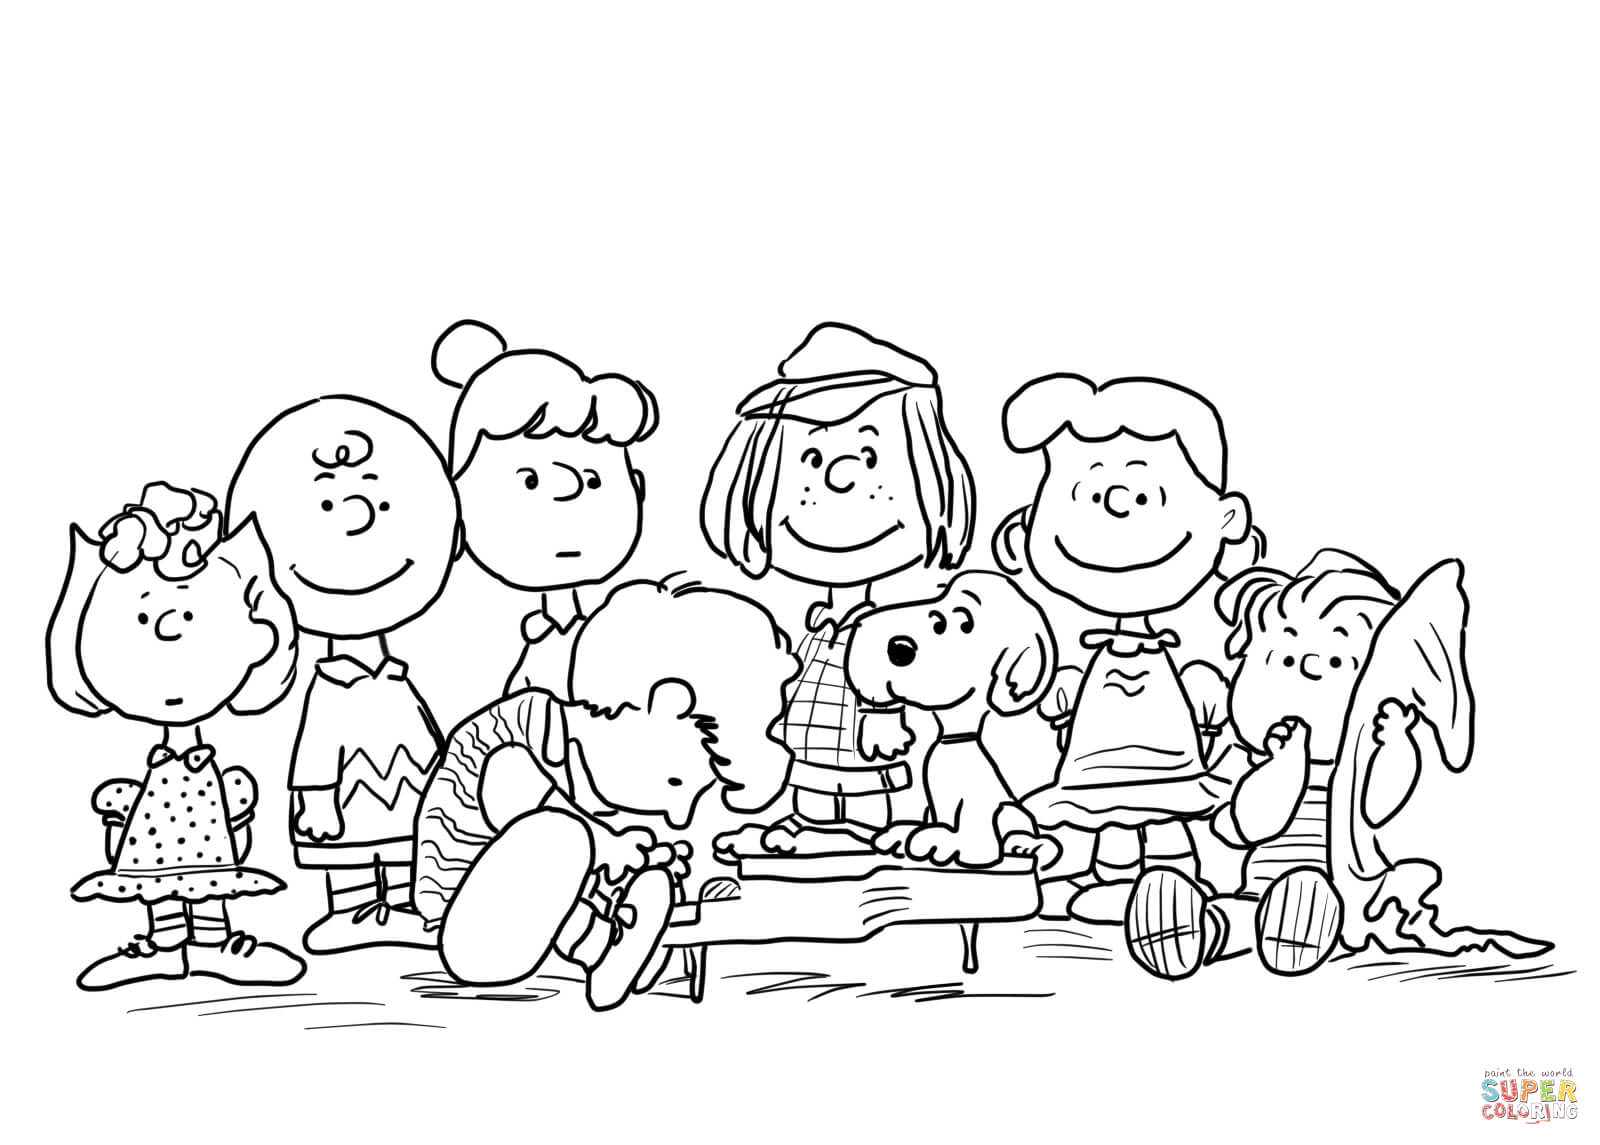 Peanuts Characters coloring page | Free Printable Coloring Pages